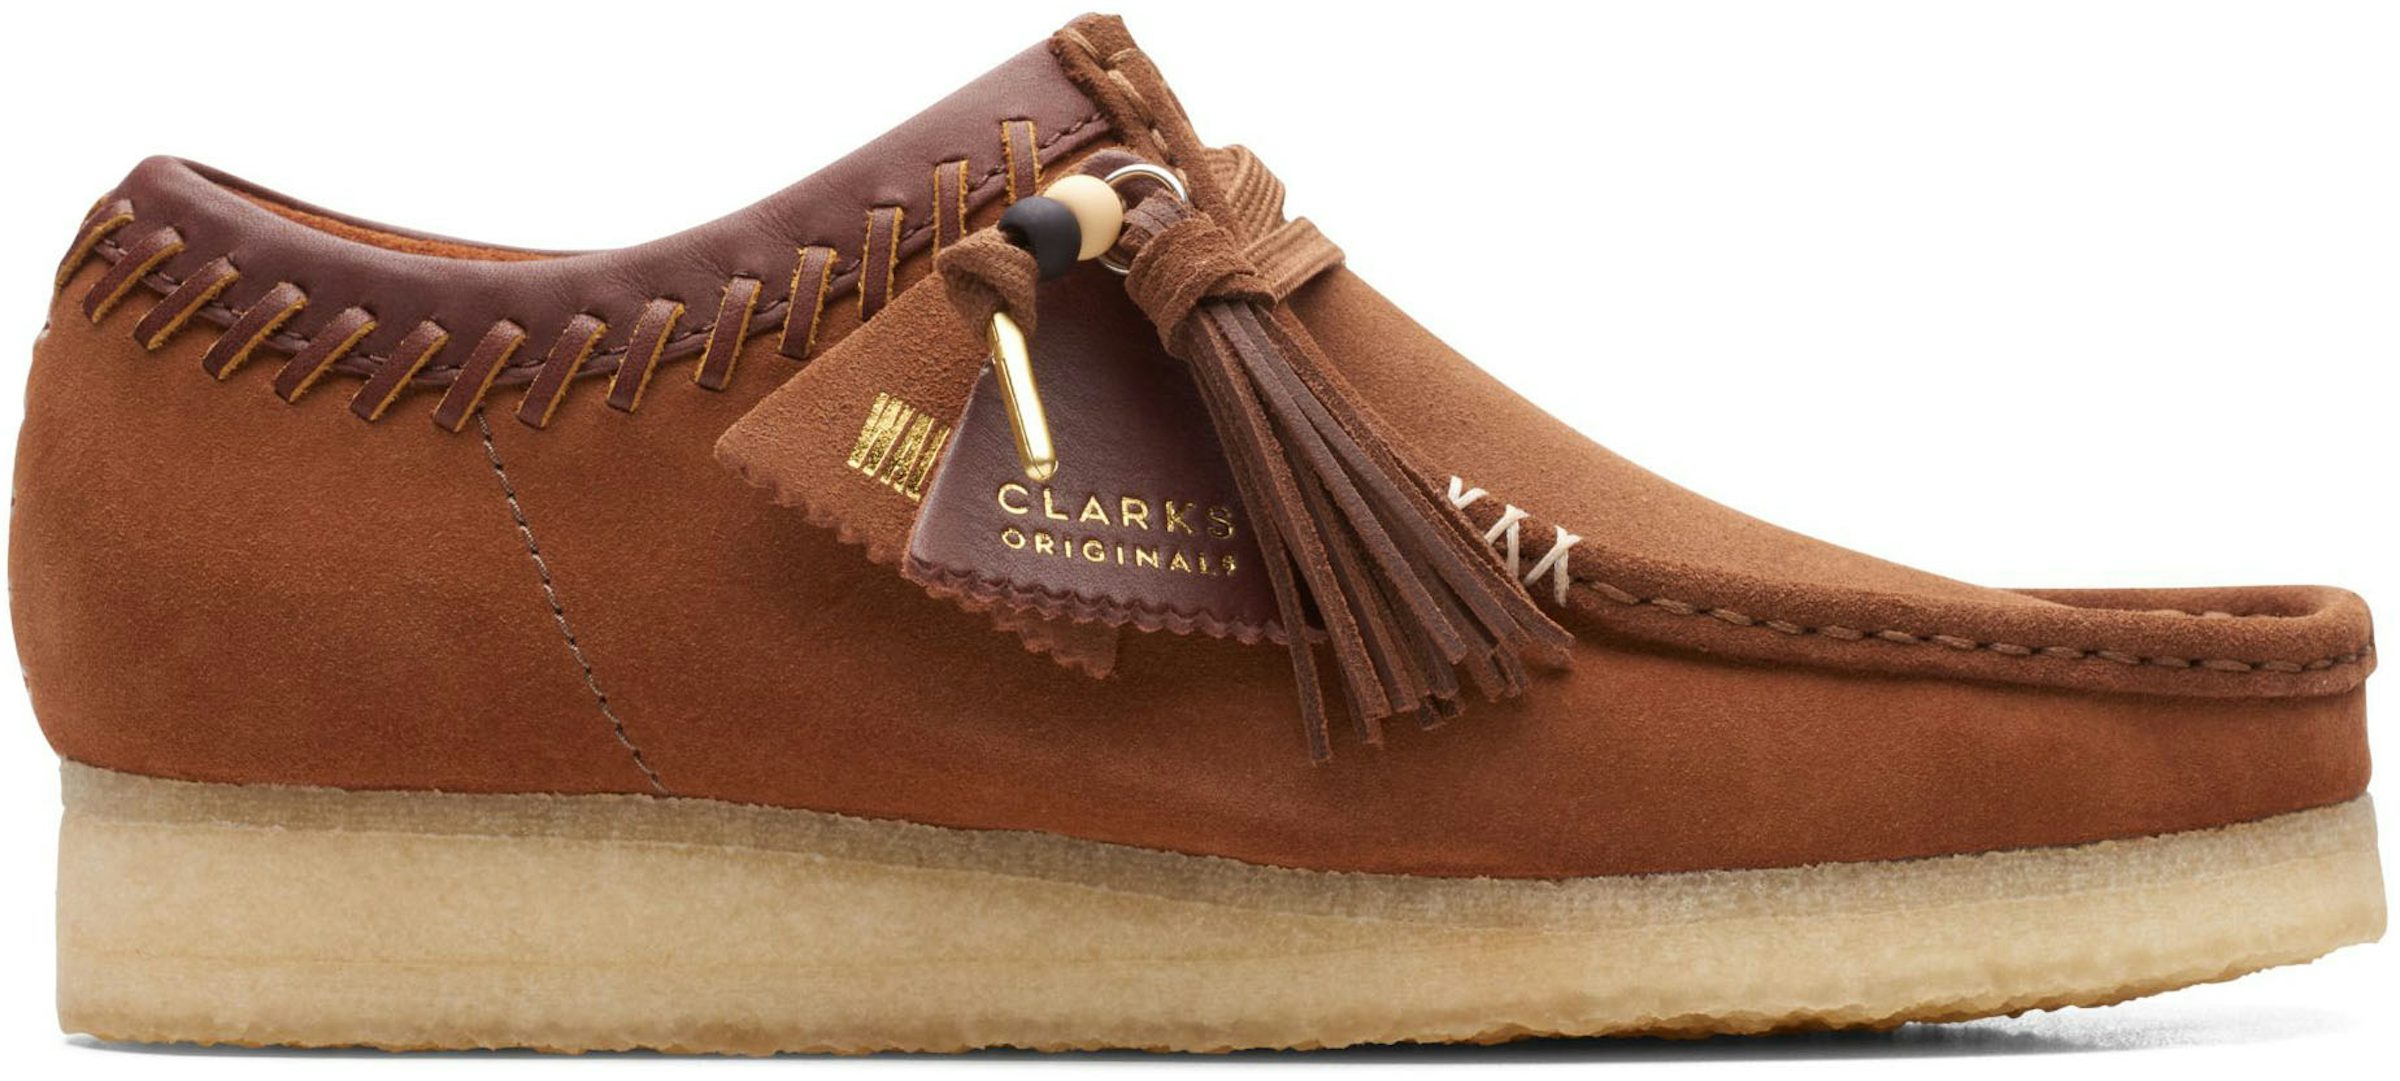 Kith & Clarks for New York Yankees Wallabee Boot - Maple Suede 8